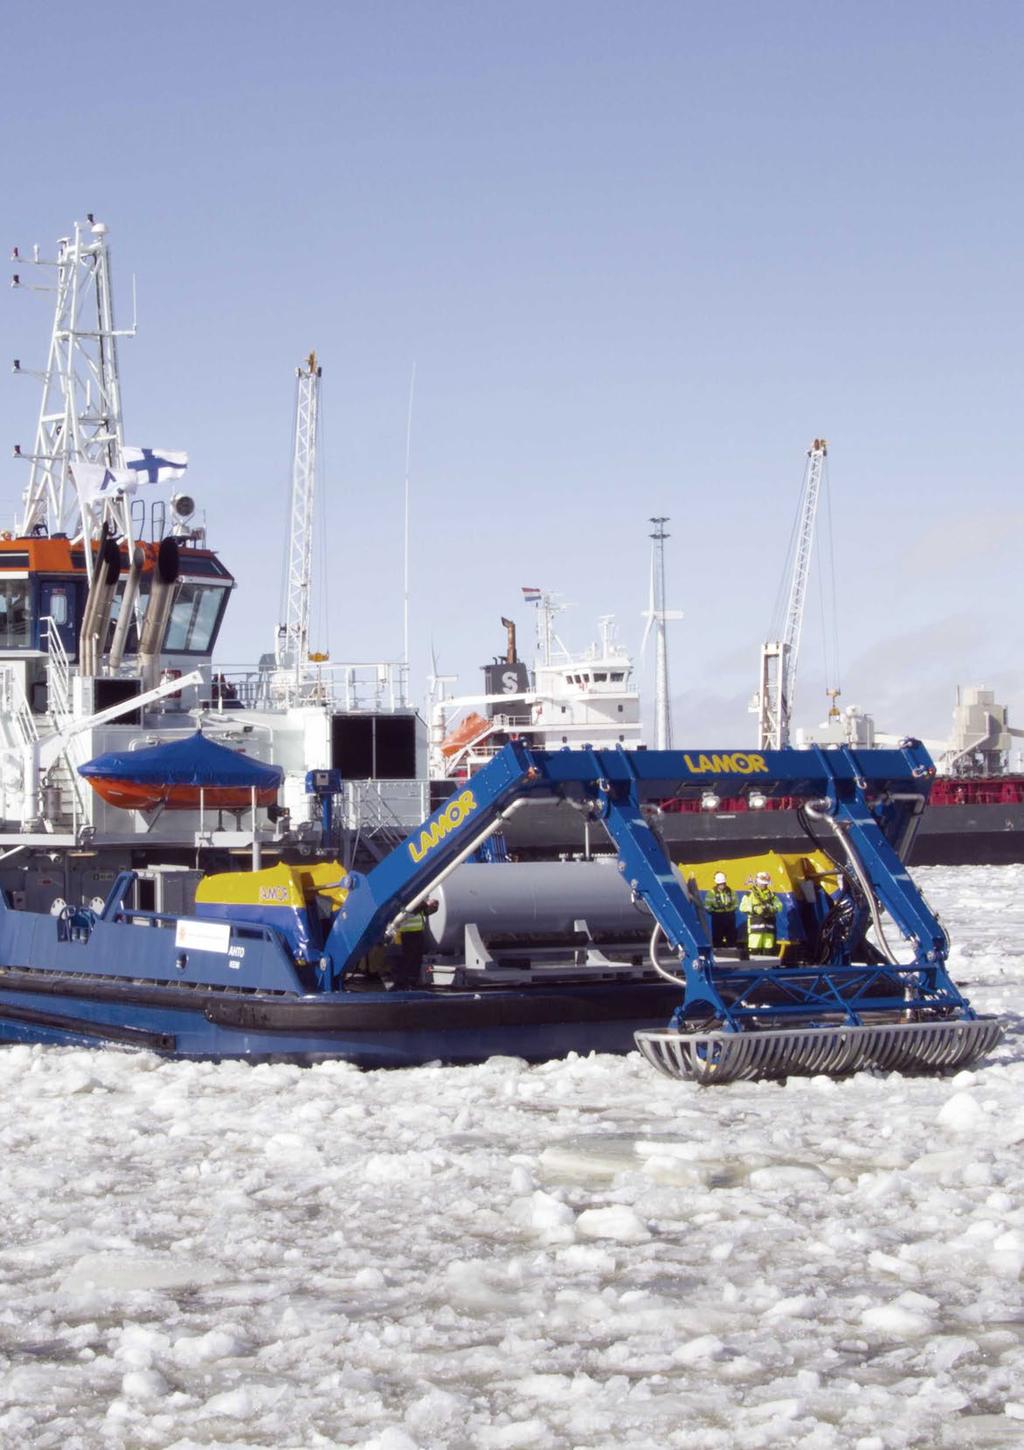 Lamor Corporation, headquartered in Finland with strategically located offices, hubs and partners worldwide, is a global market leader in oil spill response and environmental solutions for a wide